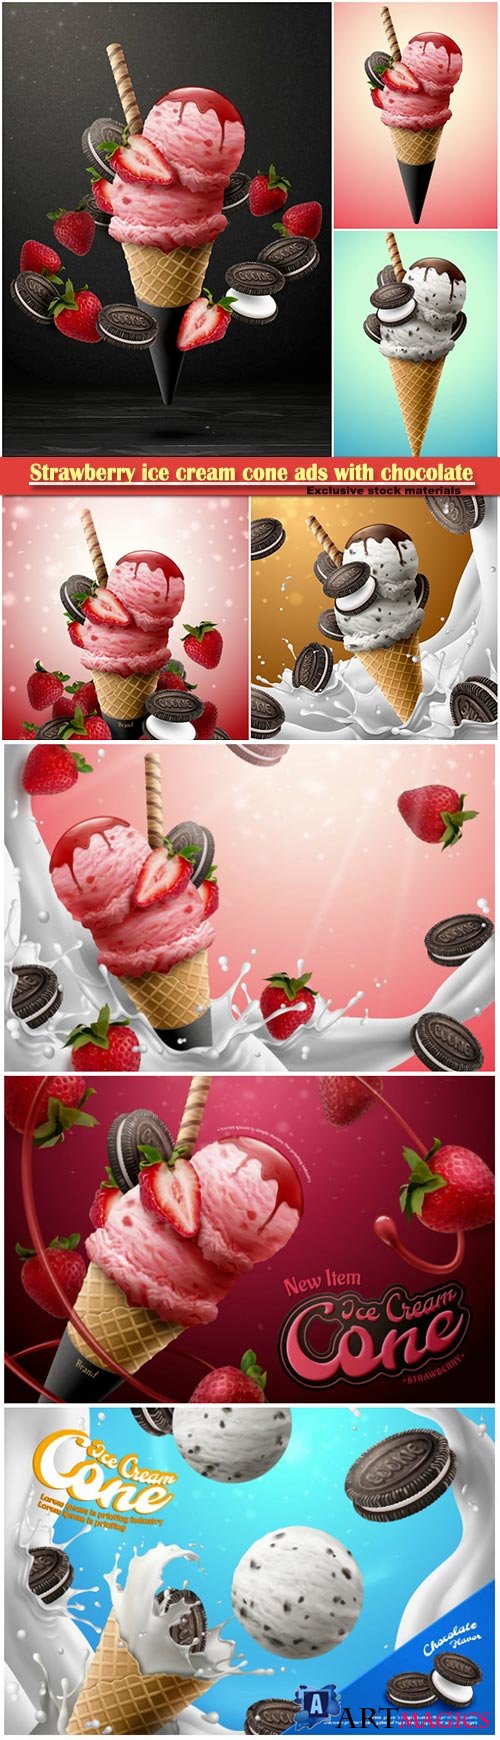 Strawberry ice cream cone ads with chocolate cookie and fresh fruit on glittering pink background, 3d illustration